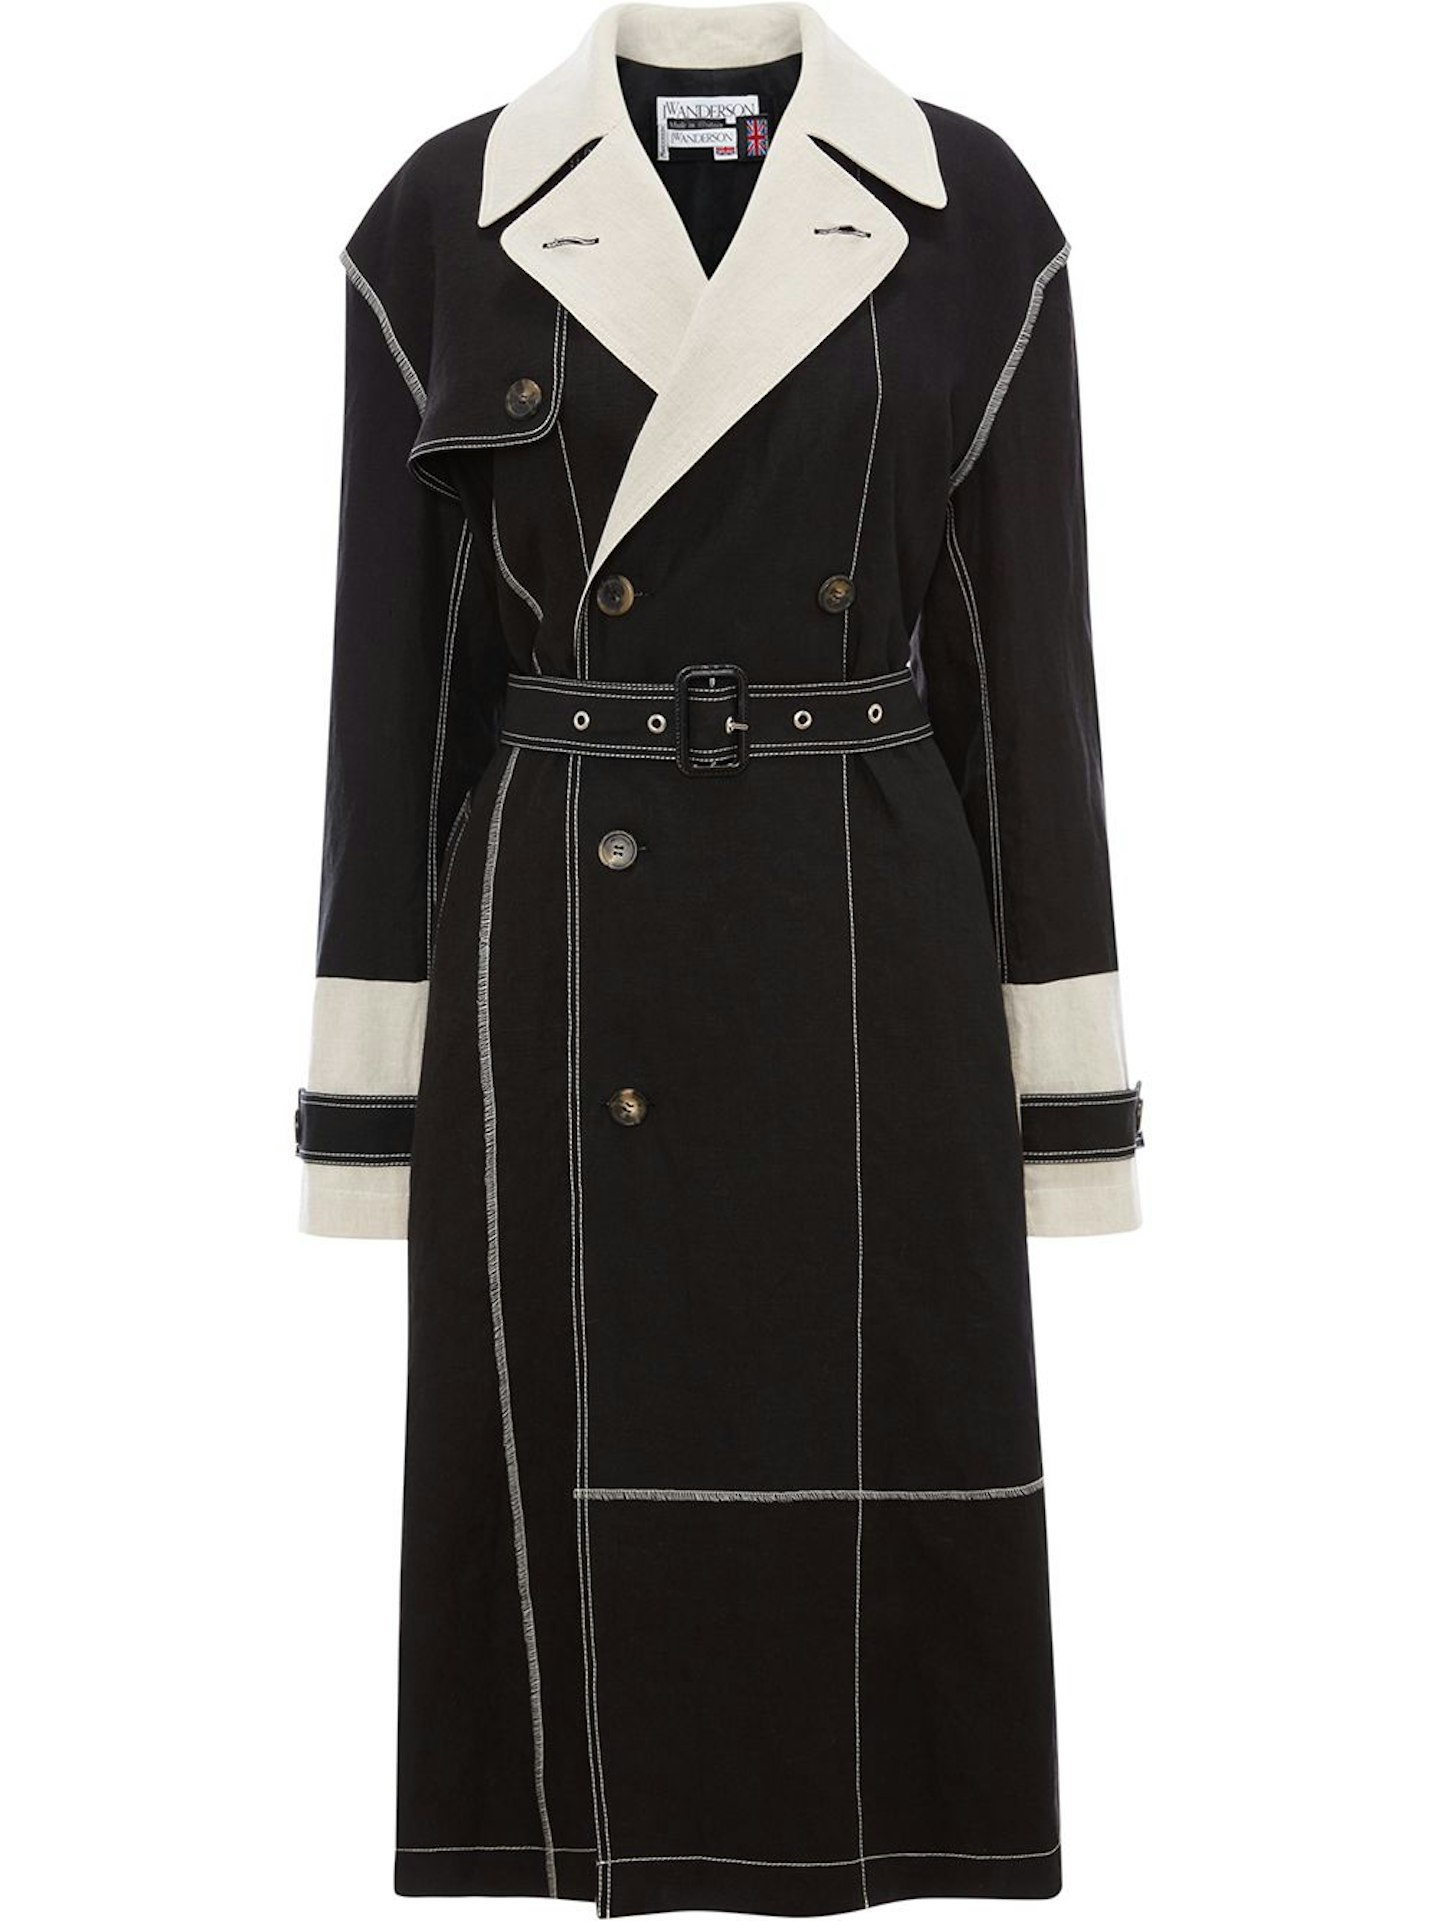 best trench coats for women JW Anderson, Contrast Stitch Belted Trench Coat, £1,650